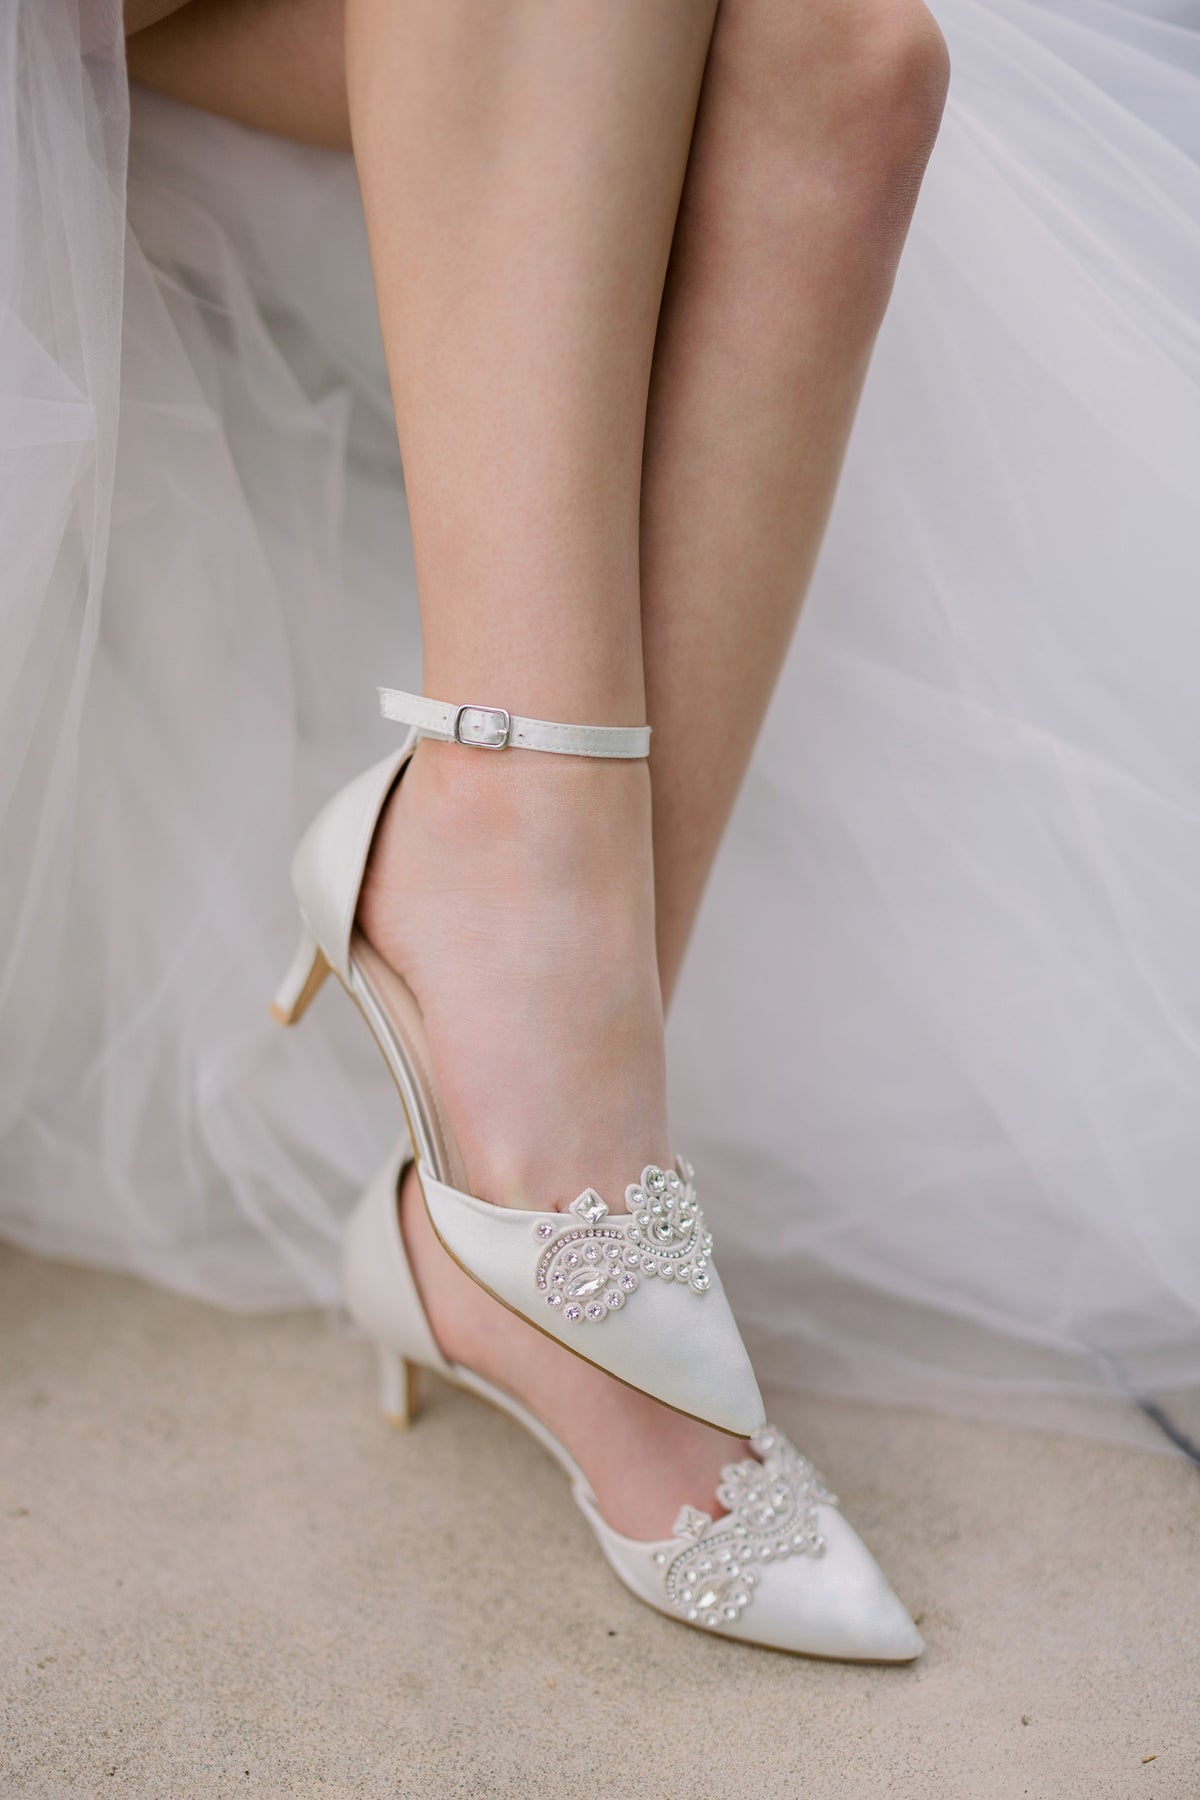 Ivory Wedding Sandals With Low Block Heel and Ankle Strap, Bridal Shoes  From Genuine Suede With Crystal Embroidery,blush Bridal Sandals - Etsy | Ivory  wedding shoes, Wedding shoes low heel, Wedding shoes